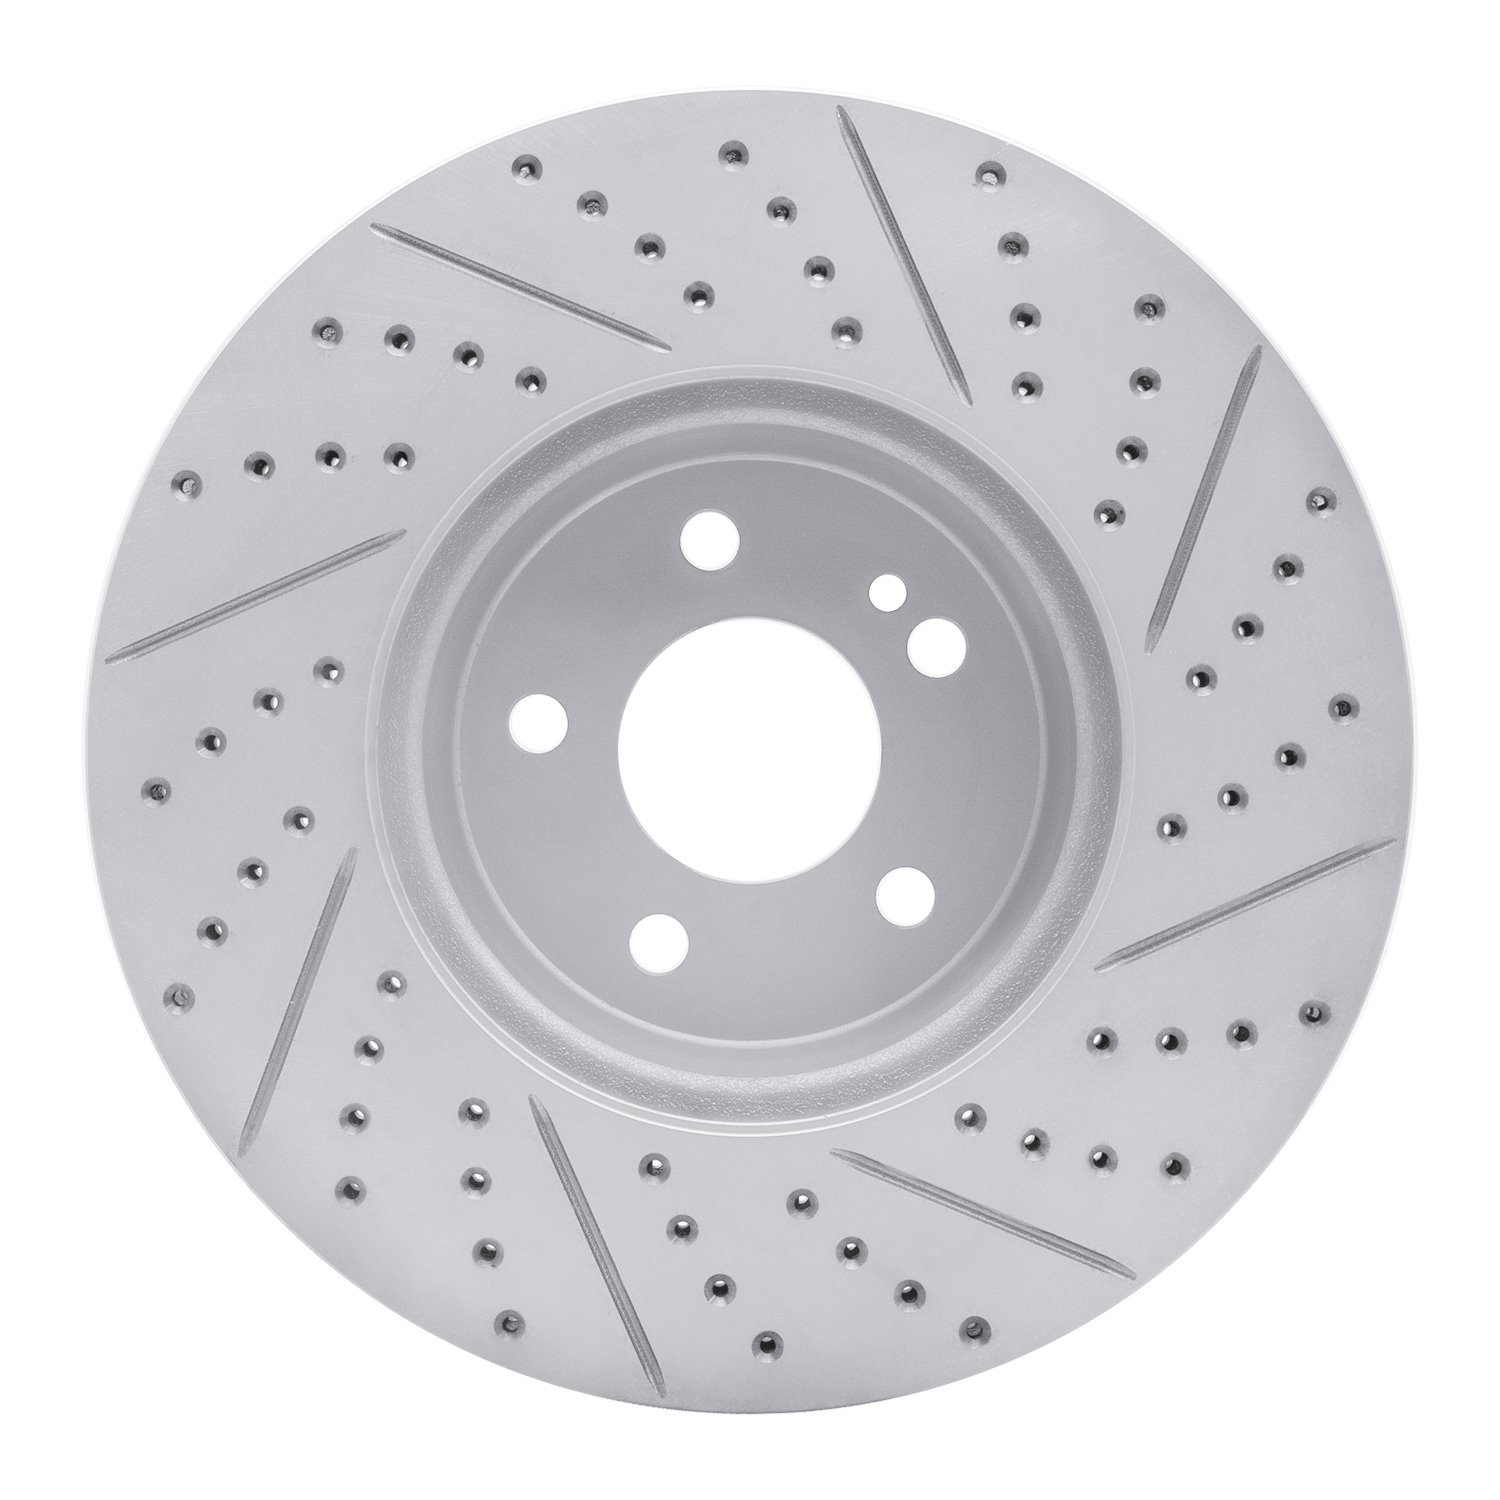 Geoperformance Drilled/Slotted Brake Rotor, Fits Select Mercedes-Benz